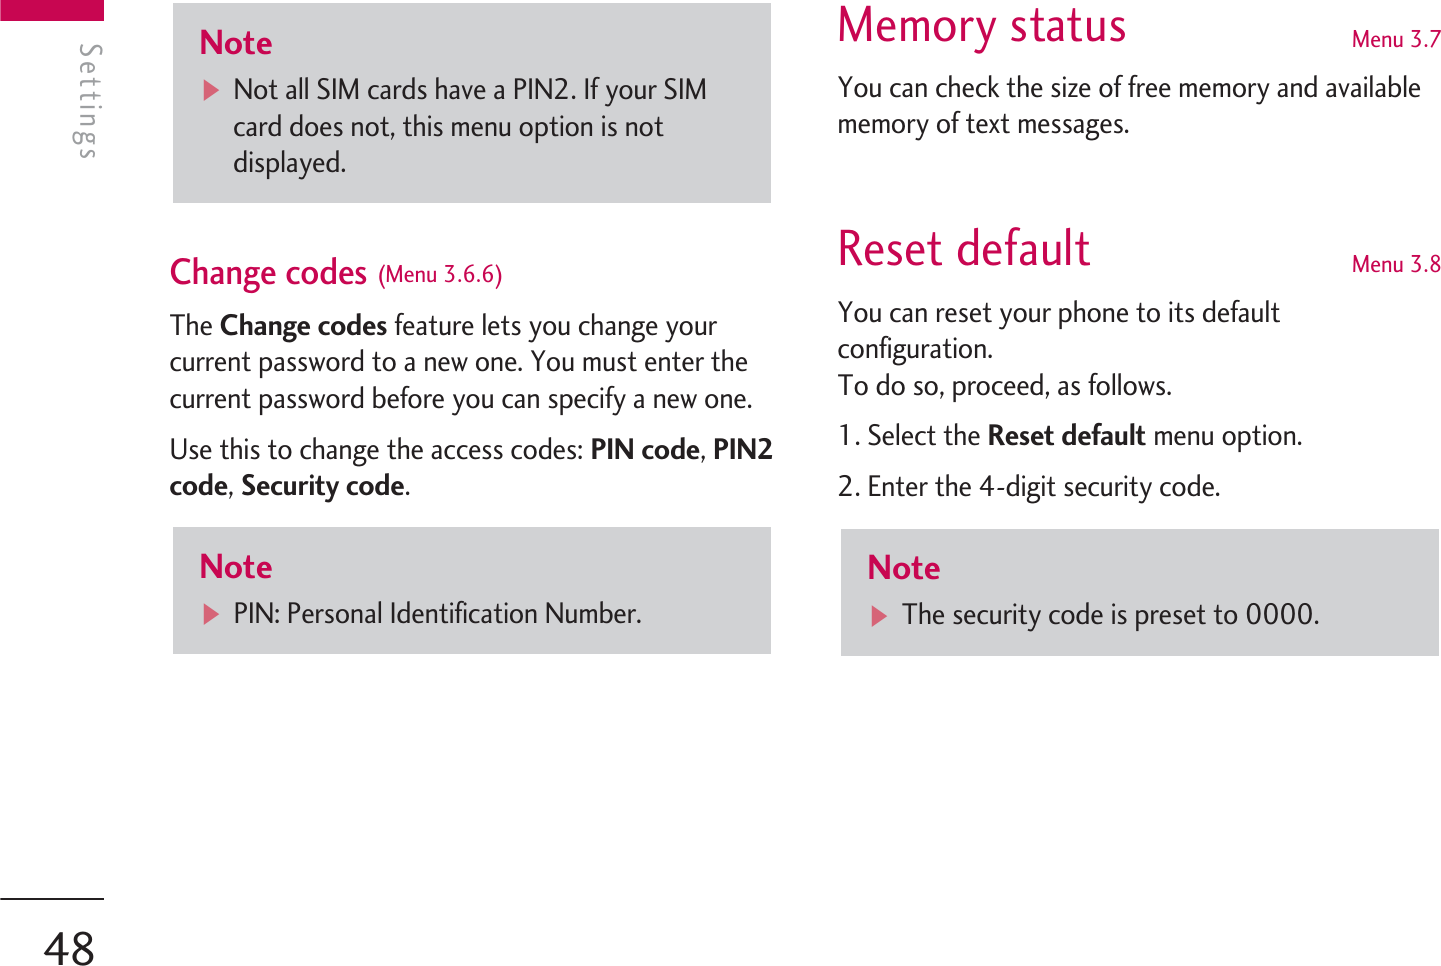 Change codes (Menu 3.6.6)The Change codes feature lets you change yourcurrent password to a new one. You must enter thecurrent password before you can specify a new one.Use this to change the access codes: PIN code, PIN2code, Security code.Memory status Menu 3.7You can check the size of free memory and availablememory of text messages.Reset default Menu 3.8You can reset your phone to its defaultconfiguration.To do so, proceed, as follows.1. Select the Reset default menu option.2. Enter the 4-digit security code.NotevThe security code is preset to 0000.NotevPIN: Personal Identification Number.NotevNot all SIM cards have a PIN2. If your SIMcard does not, this menu option is notdisplayed.SettingsSettings48